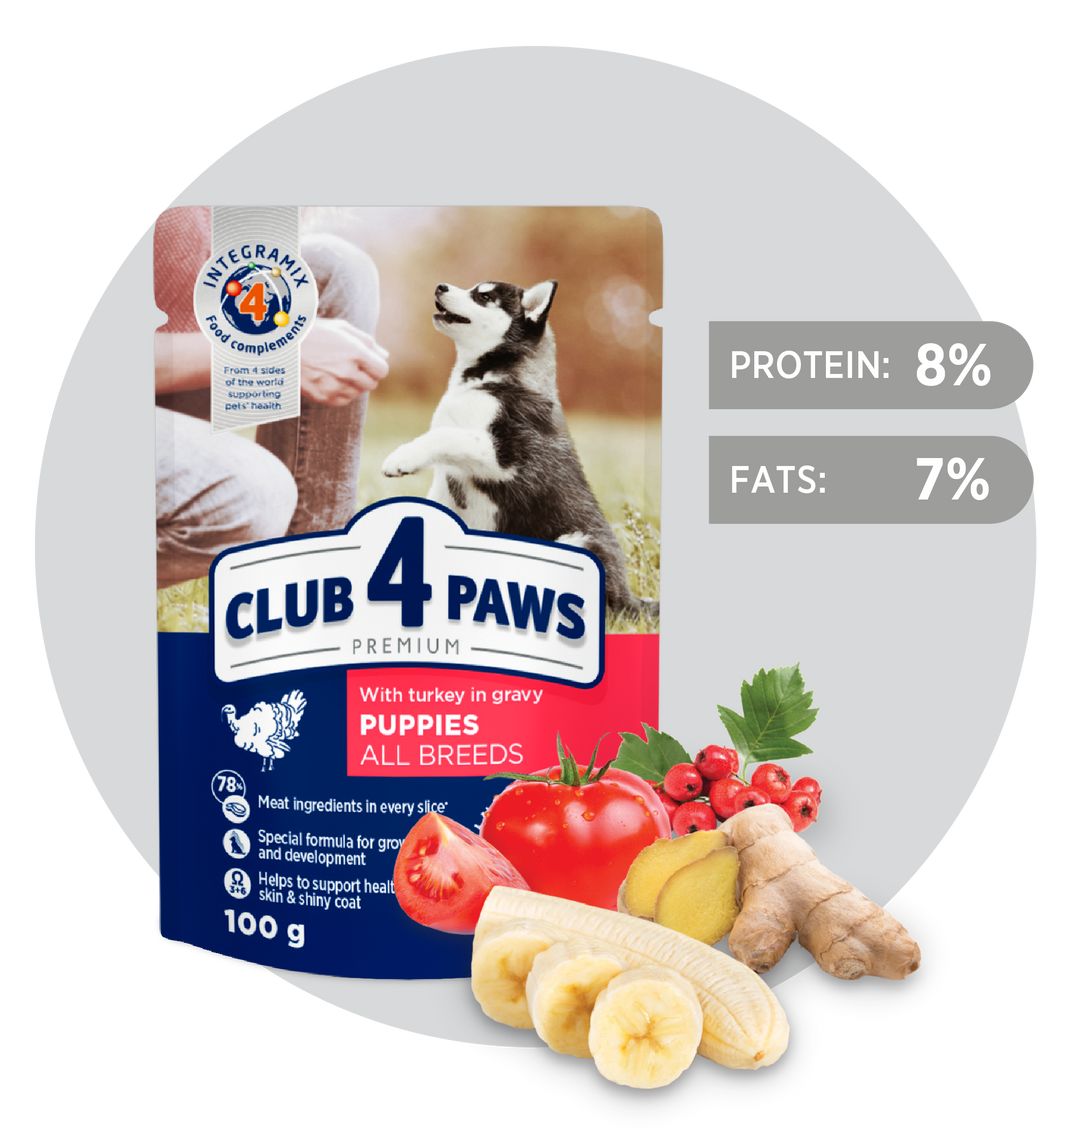 CLUB 4 PAWS Premium For Puppies, With Turkey in Gravy. Complete Wet Pet Food (6 Pack)